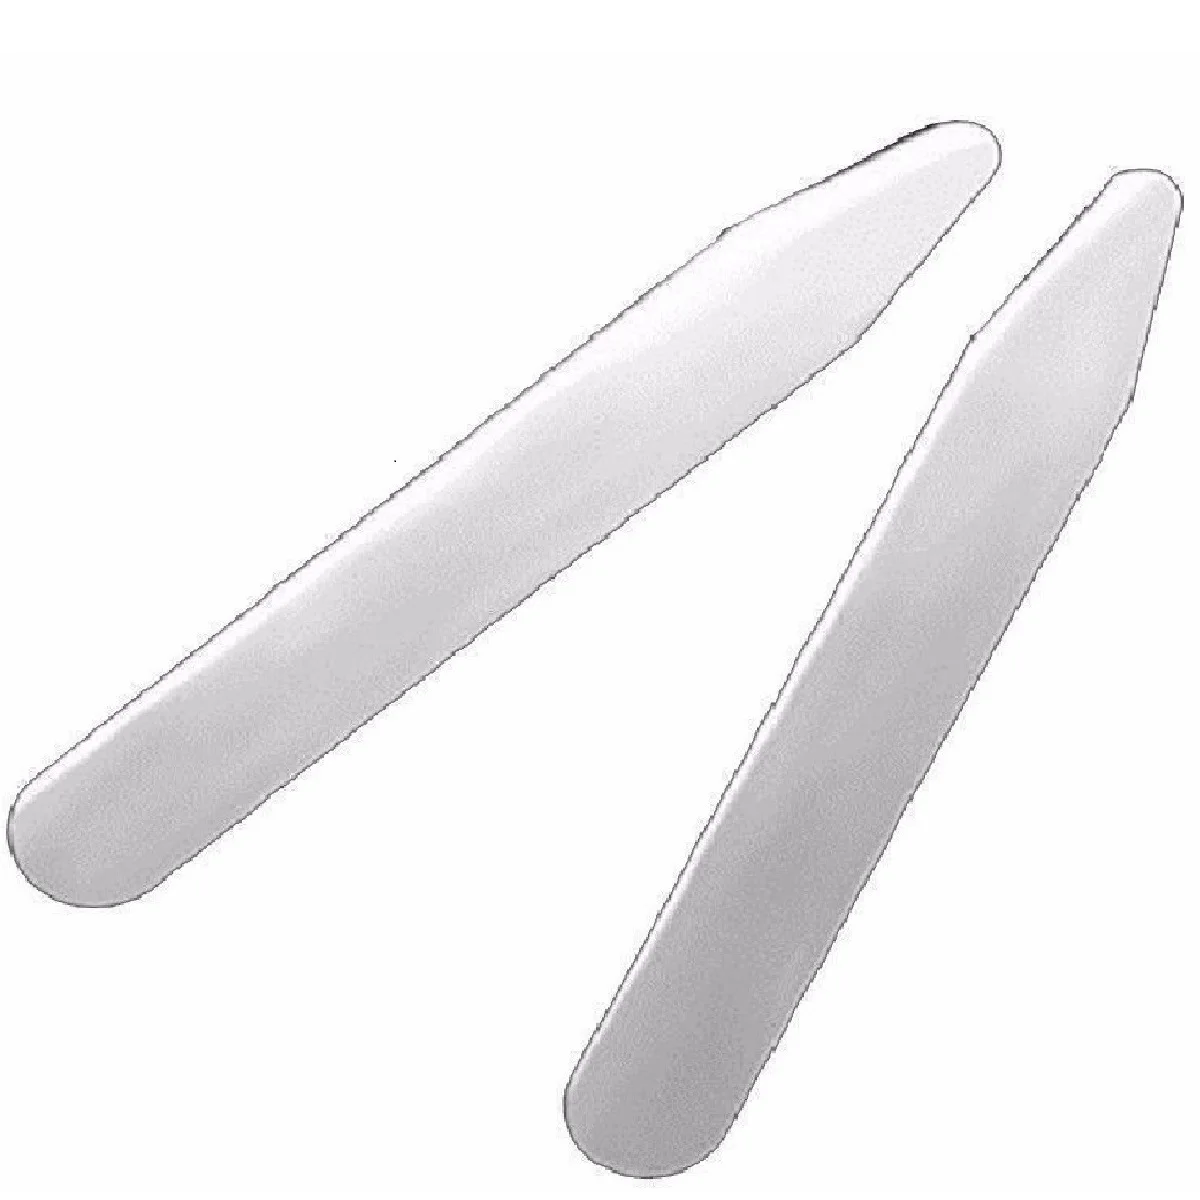 2.5 Inch Metal Collar Stiffeners MODERN GOODS SHOP Stainless Steel Collar Stays With Laser Engraved Rain Cloud Design Made In USA